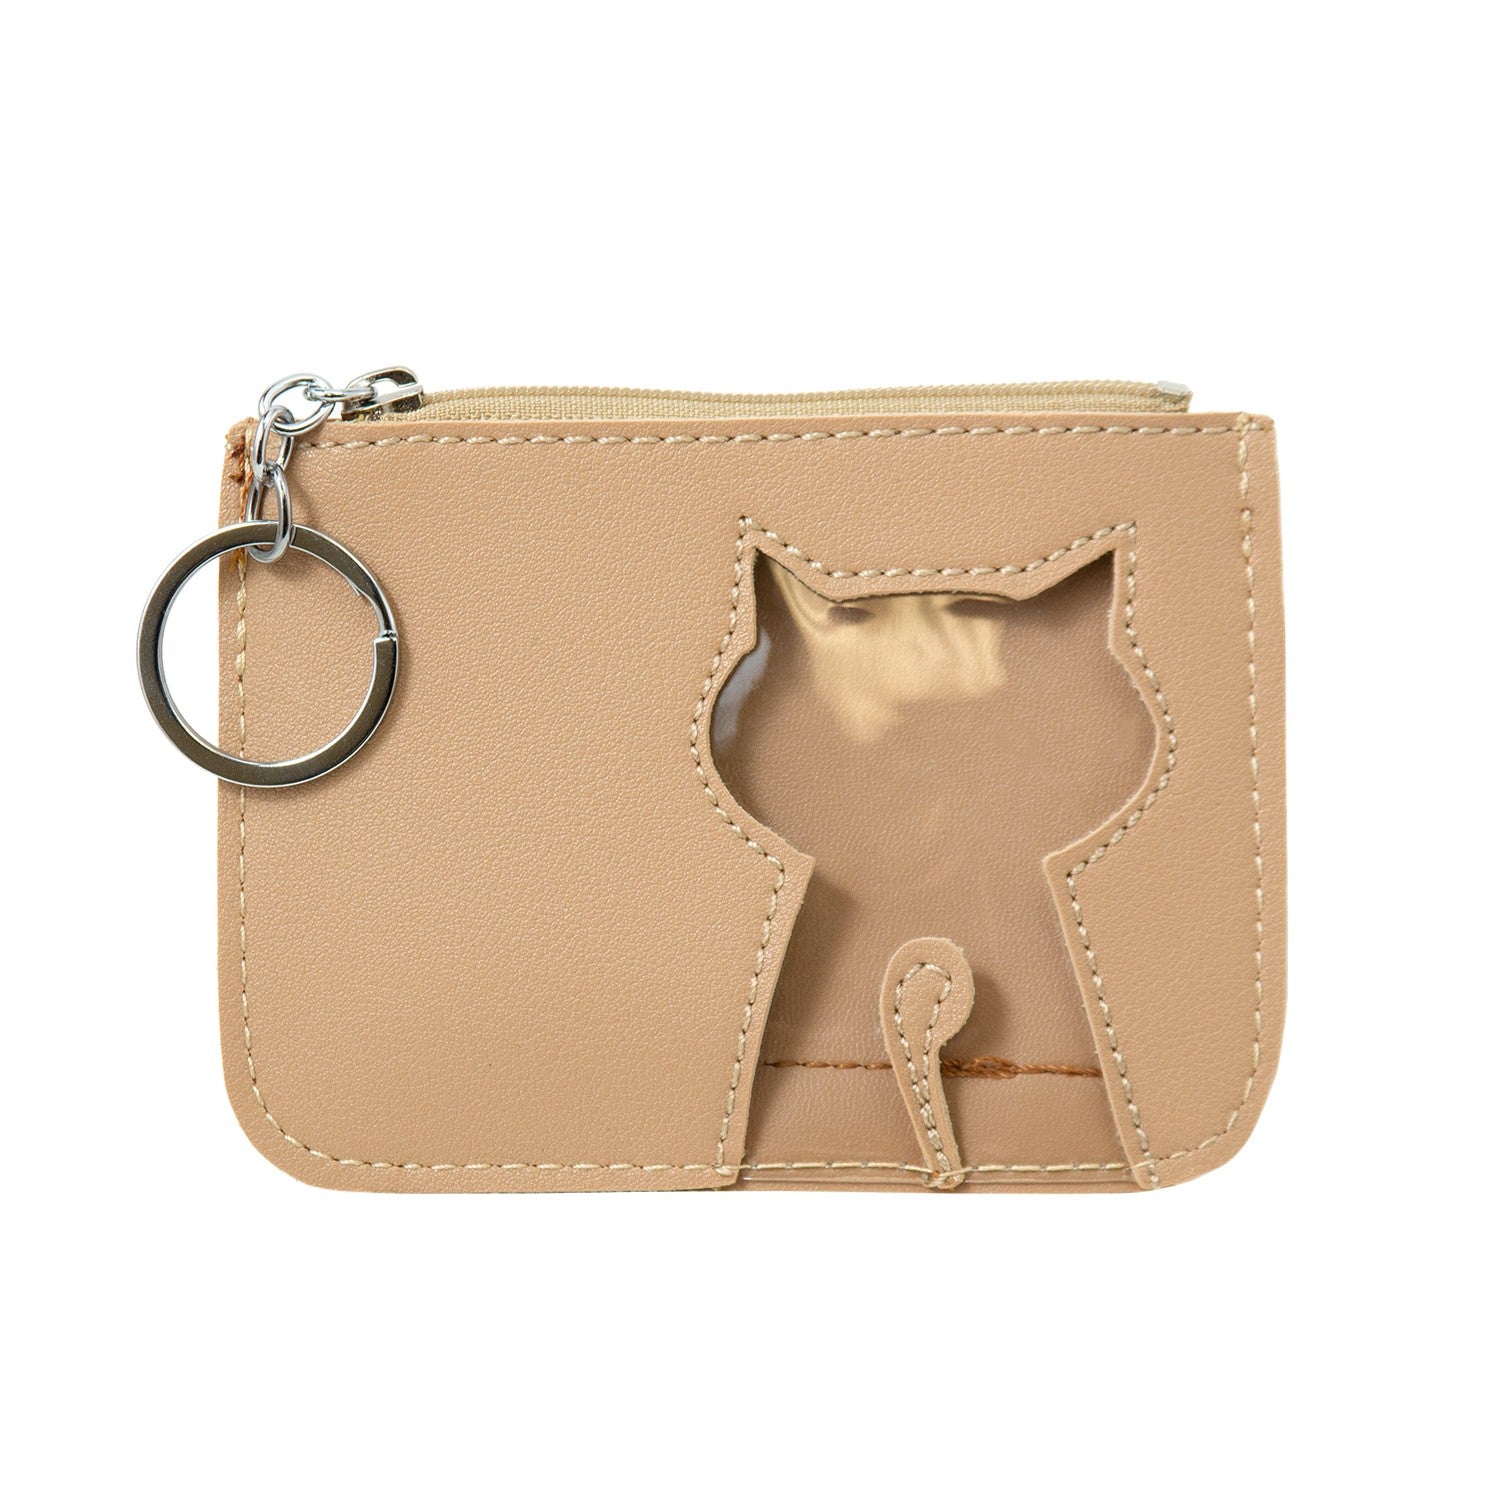 Wholesale Womens Cat Coin Purse with Front Pocket in 4 Assorted Colors - Bulk Case of 24 - 1141-24